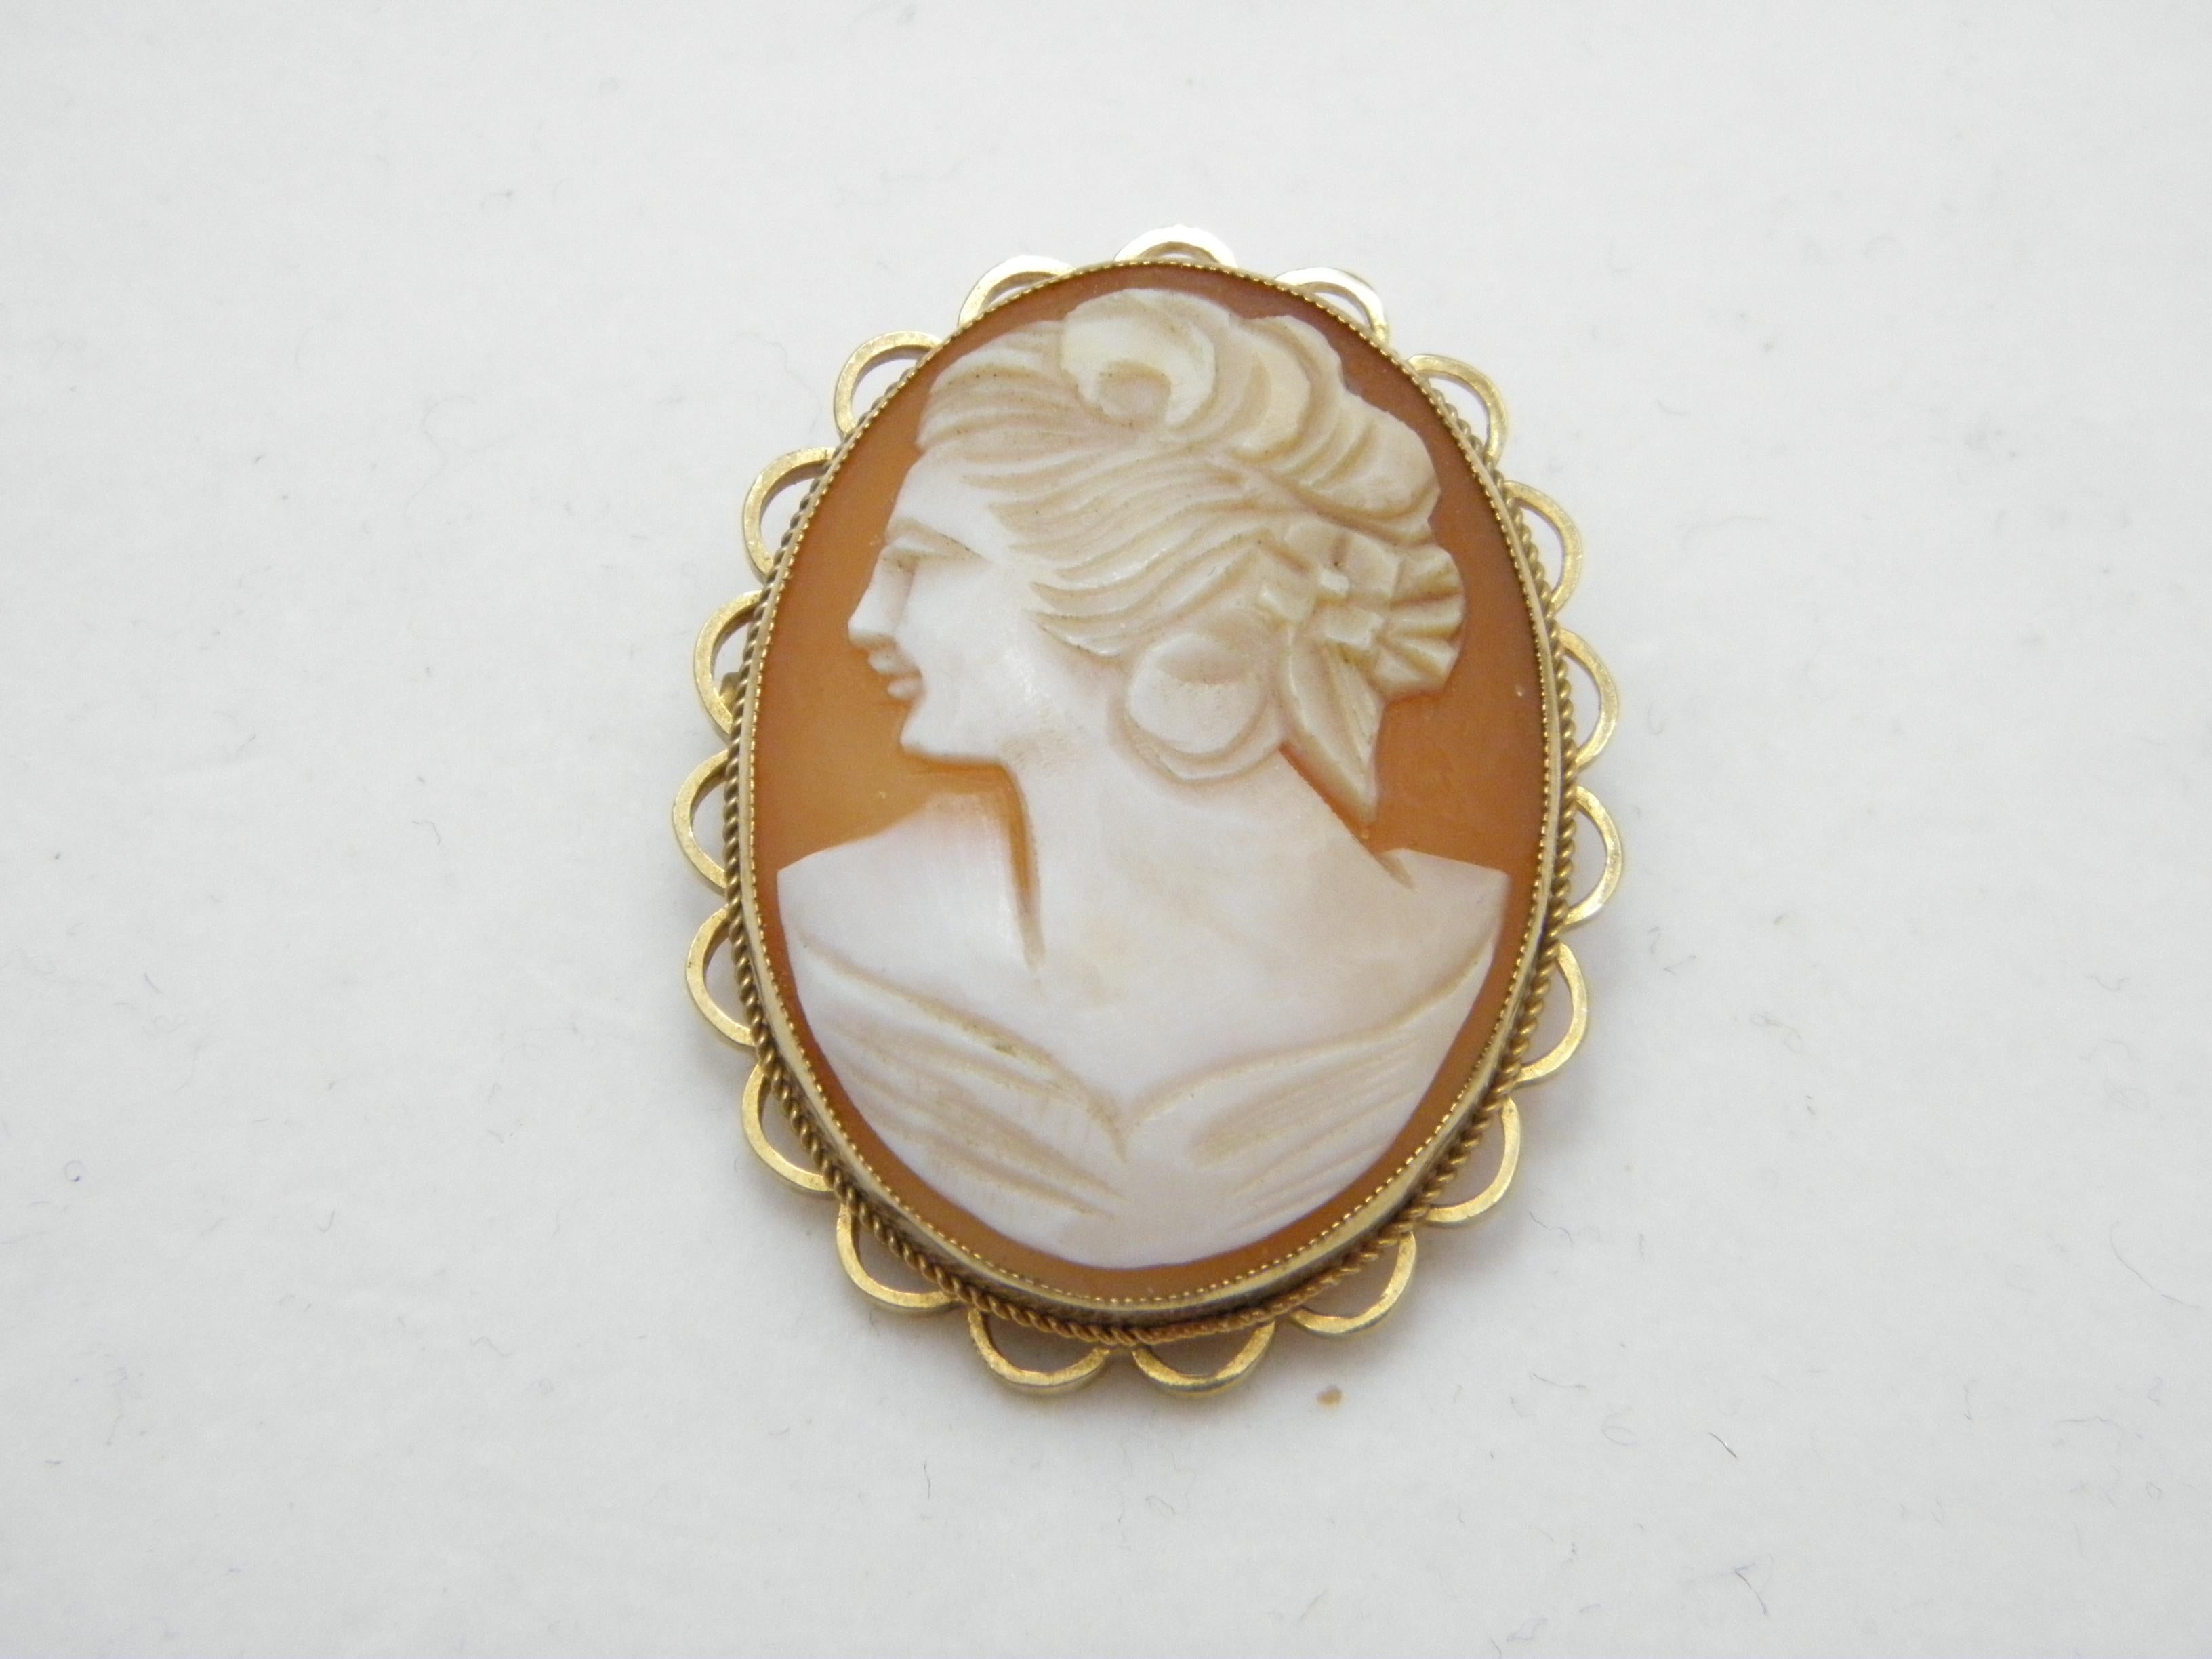 If you have landed on this page then you have an eye for beauty.

On offer is this gorgeous

9CT HEAVY GOLD GOLD CARVED SHELL CAMEO BROOCH

DETAILS
Material: 9ct (375/000) Solid Yellow Gold - thick and lovely design.
Style: Victorian classic Cameo,